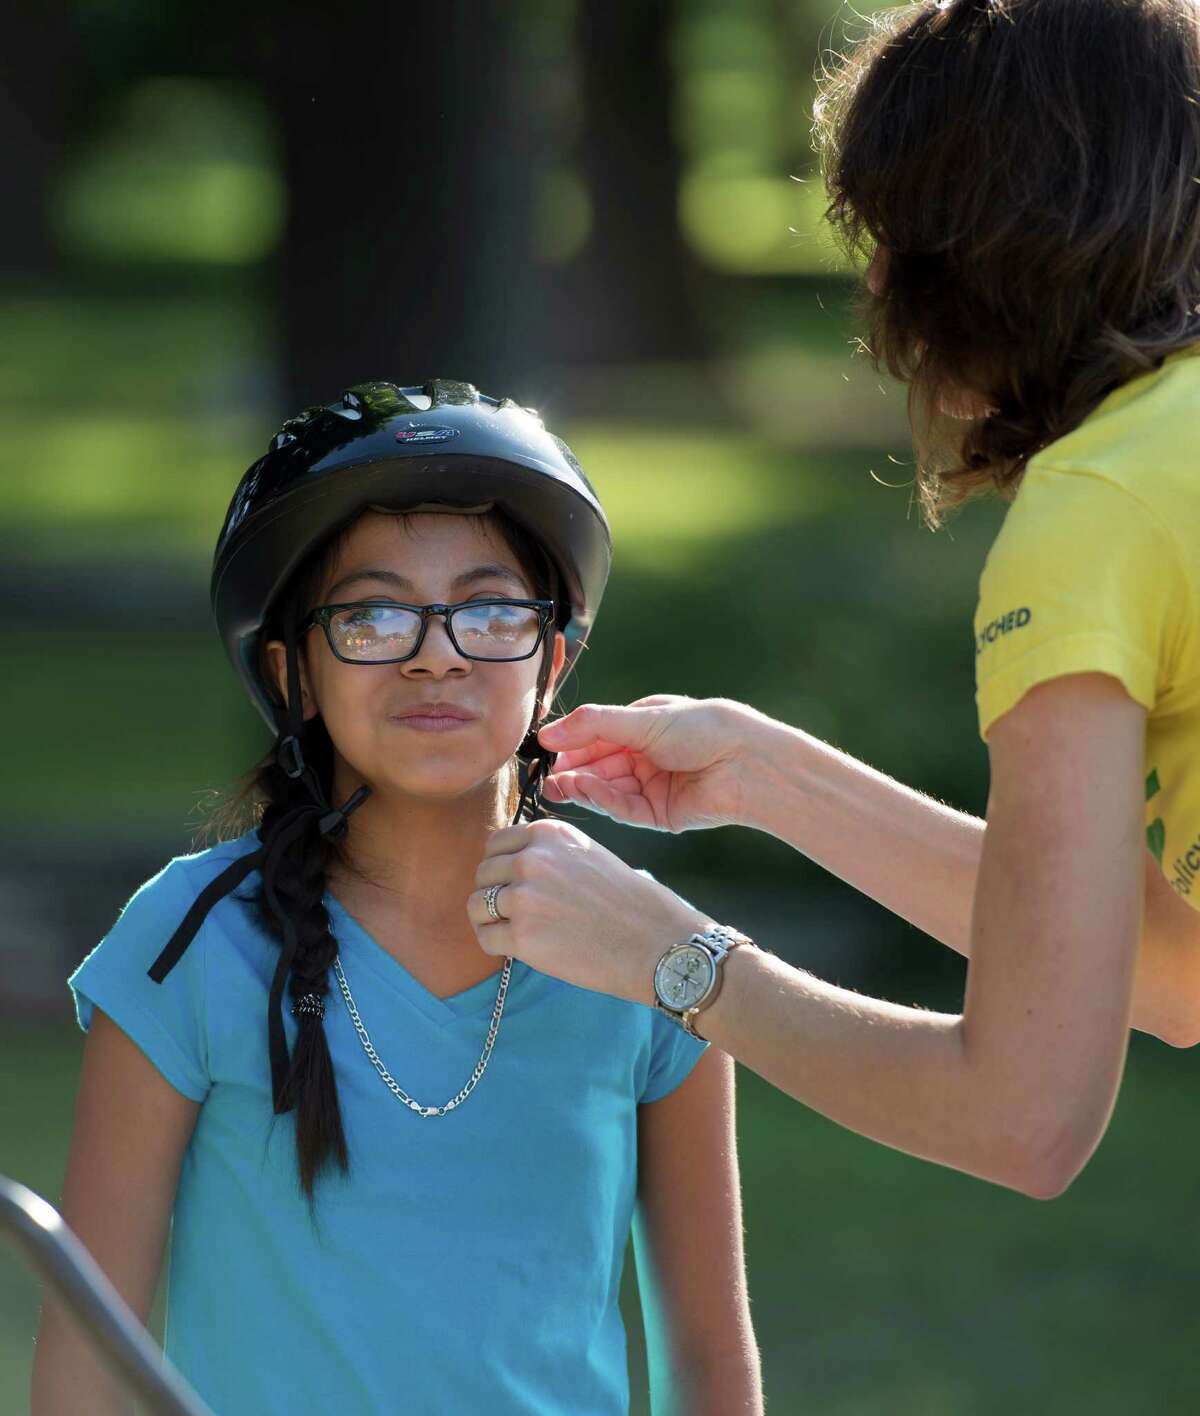 Diamond Hernandez, 13, gets some help adjusting her helmet from Allison Blazosky before a bicycle ride organized by Roll Models and the San Antonio Housing Authority, Saturday, July 13, 2013, in San Antonio. Roll Models is a program that helps kids and families bike to areas outside of their own neighborhoods. (Darren Abate/For the Express-News)